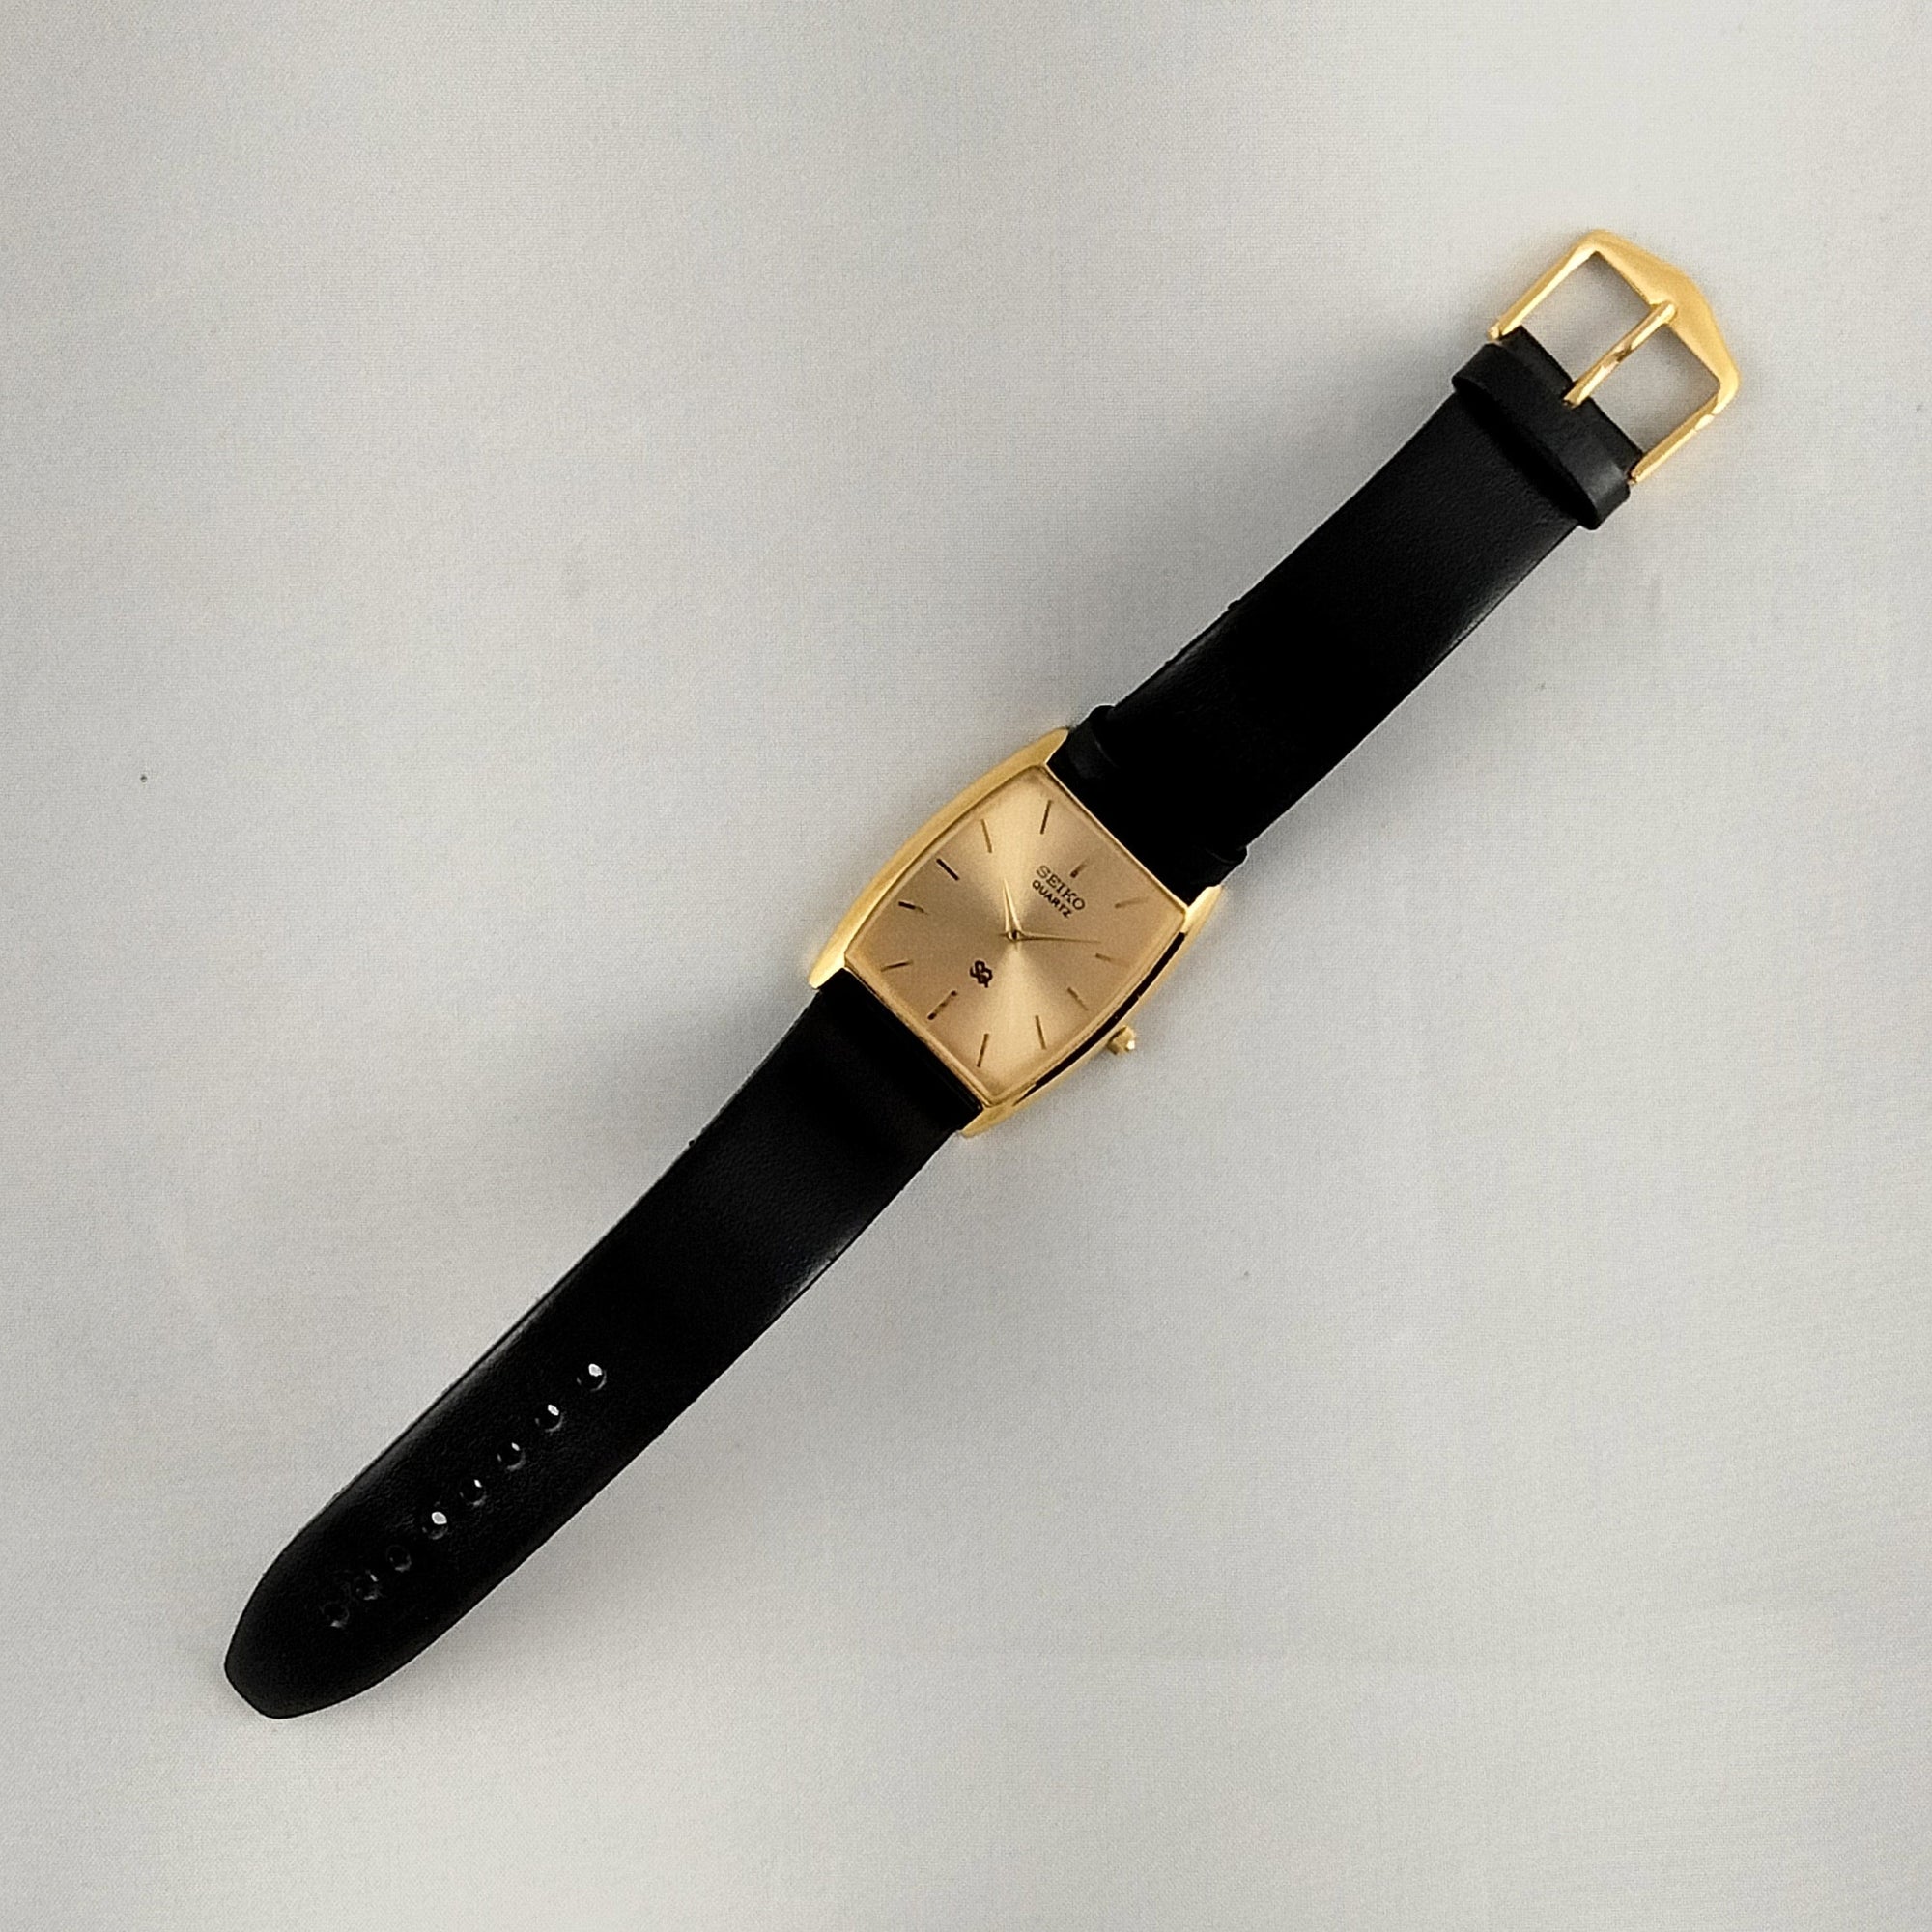 I Like Mikes Mid Century Modern Watches Seiko Unisex Watch, Gold Tone Face, Genuine Black Leather Strap